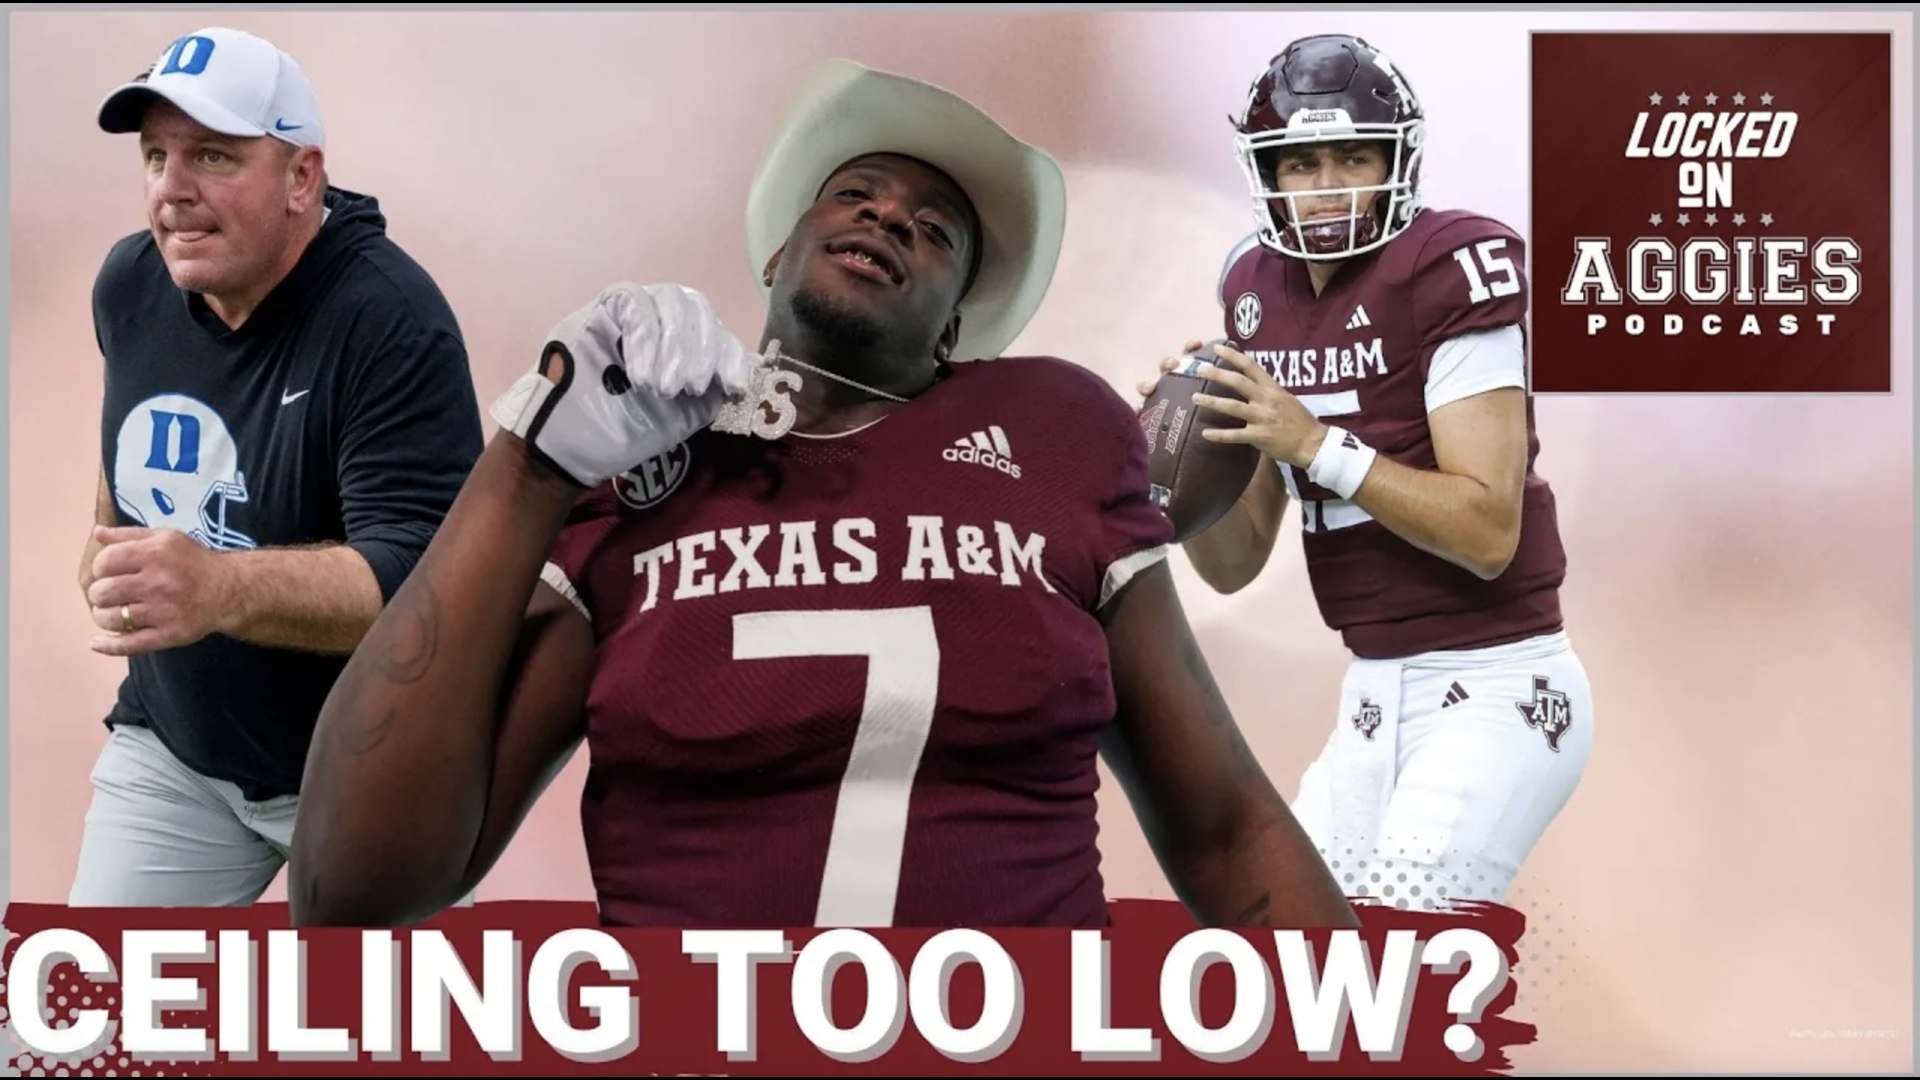 On today's episode of Locked On Aggies, host Andrew Stefaniak talks about an article from Saturday Down South that has the ceiling listed as too low for the Aggies